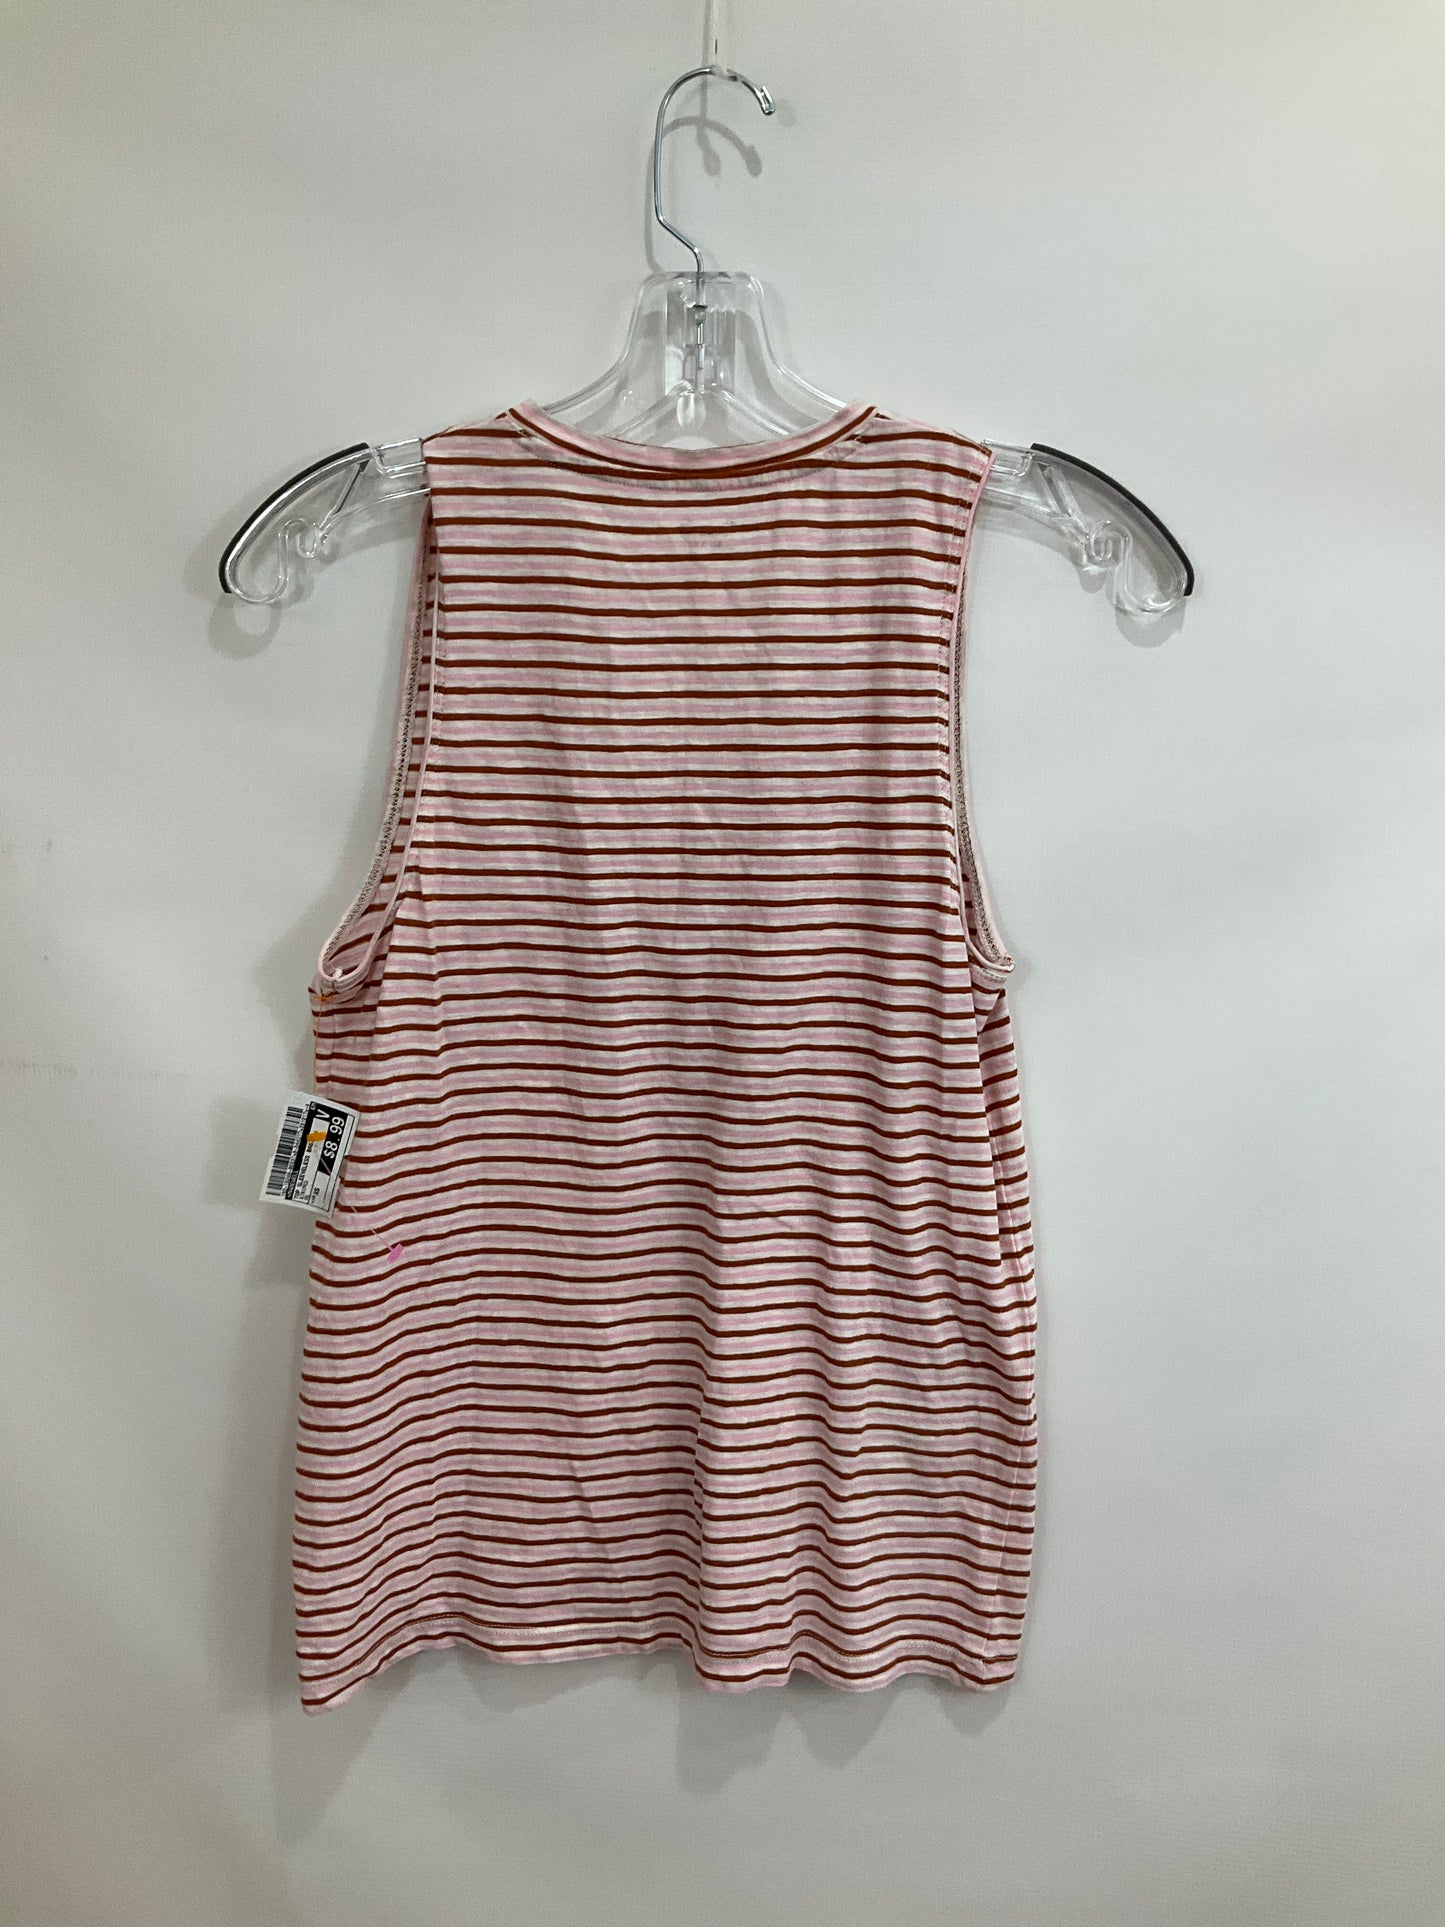 Top Sleeveless Basic By Madewell  Size: Xs